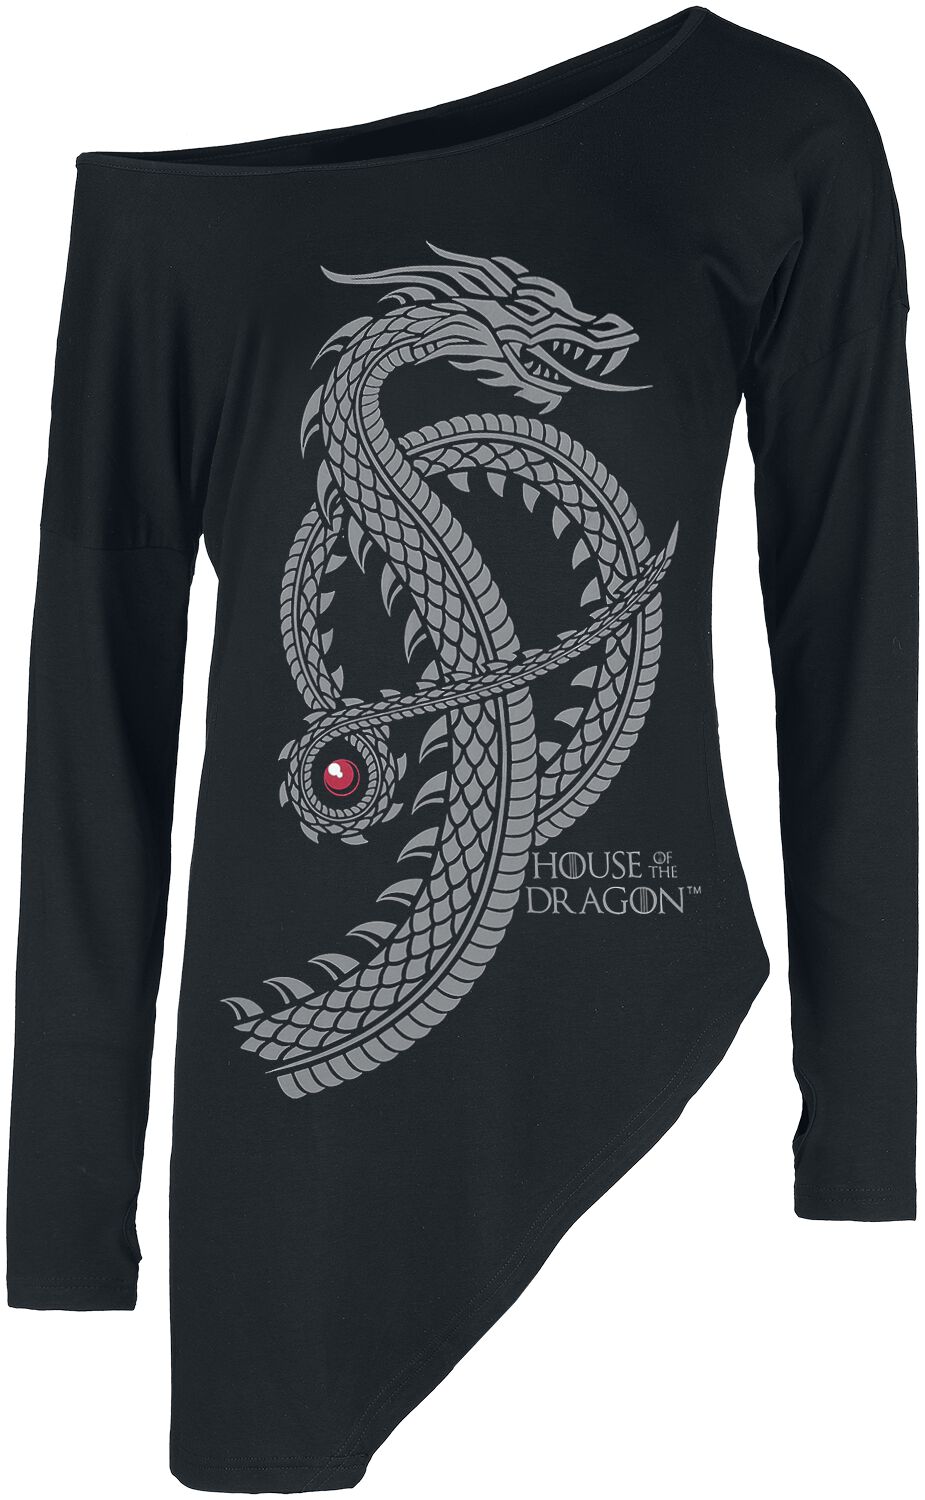 Game of Thrones House of the Dragon - Fear the dragon Long-sleeve Shirt black